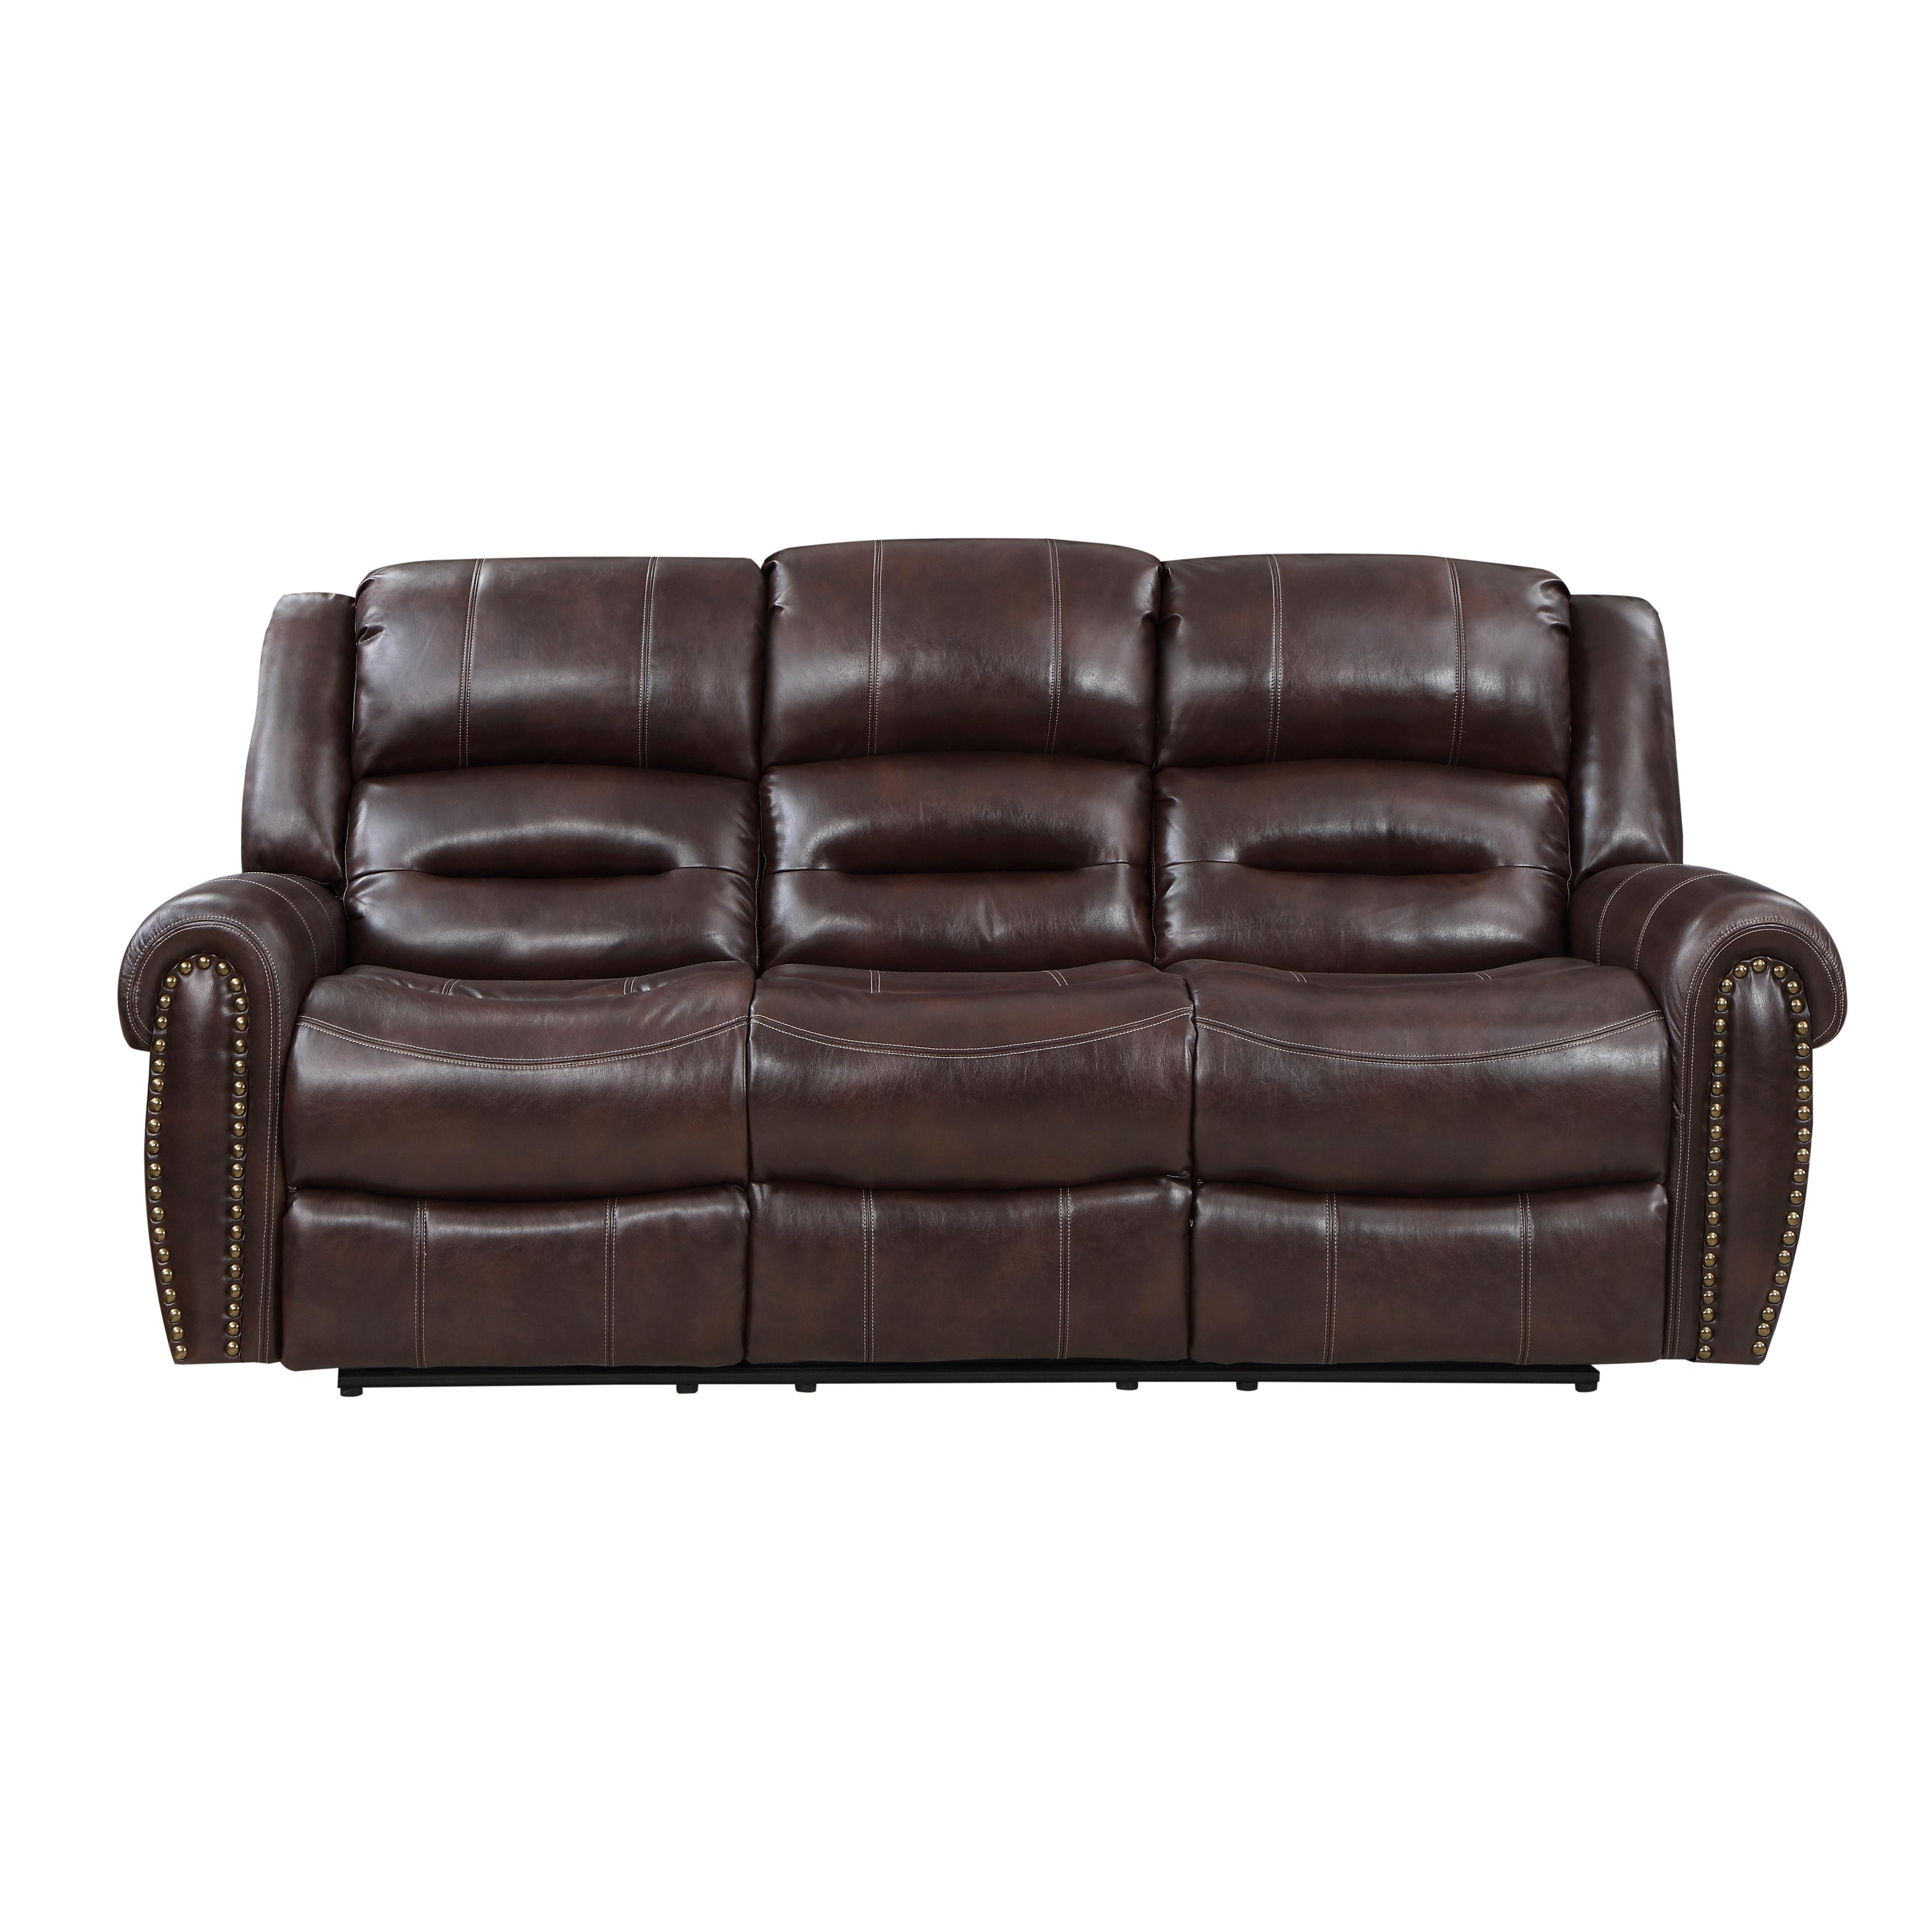 Traditional Reclining Sofa 9668NBR-3 Center Hill 9668NBR-3 in Brown Faux Leather